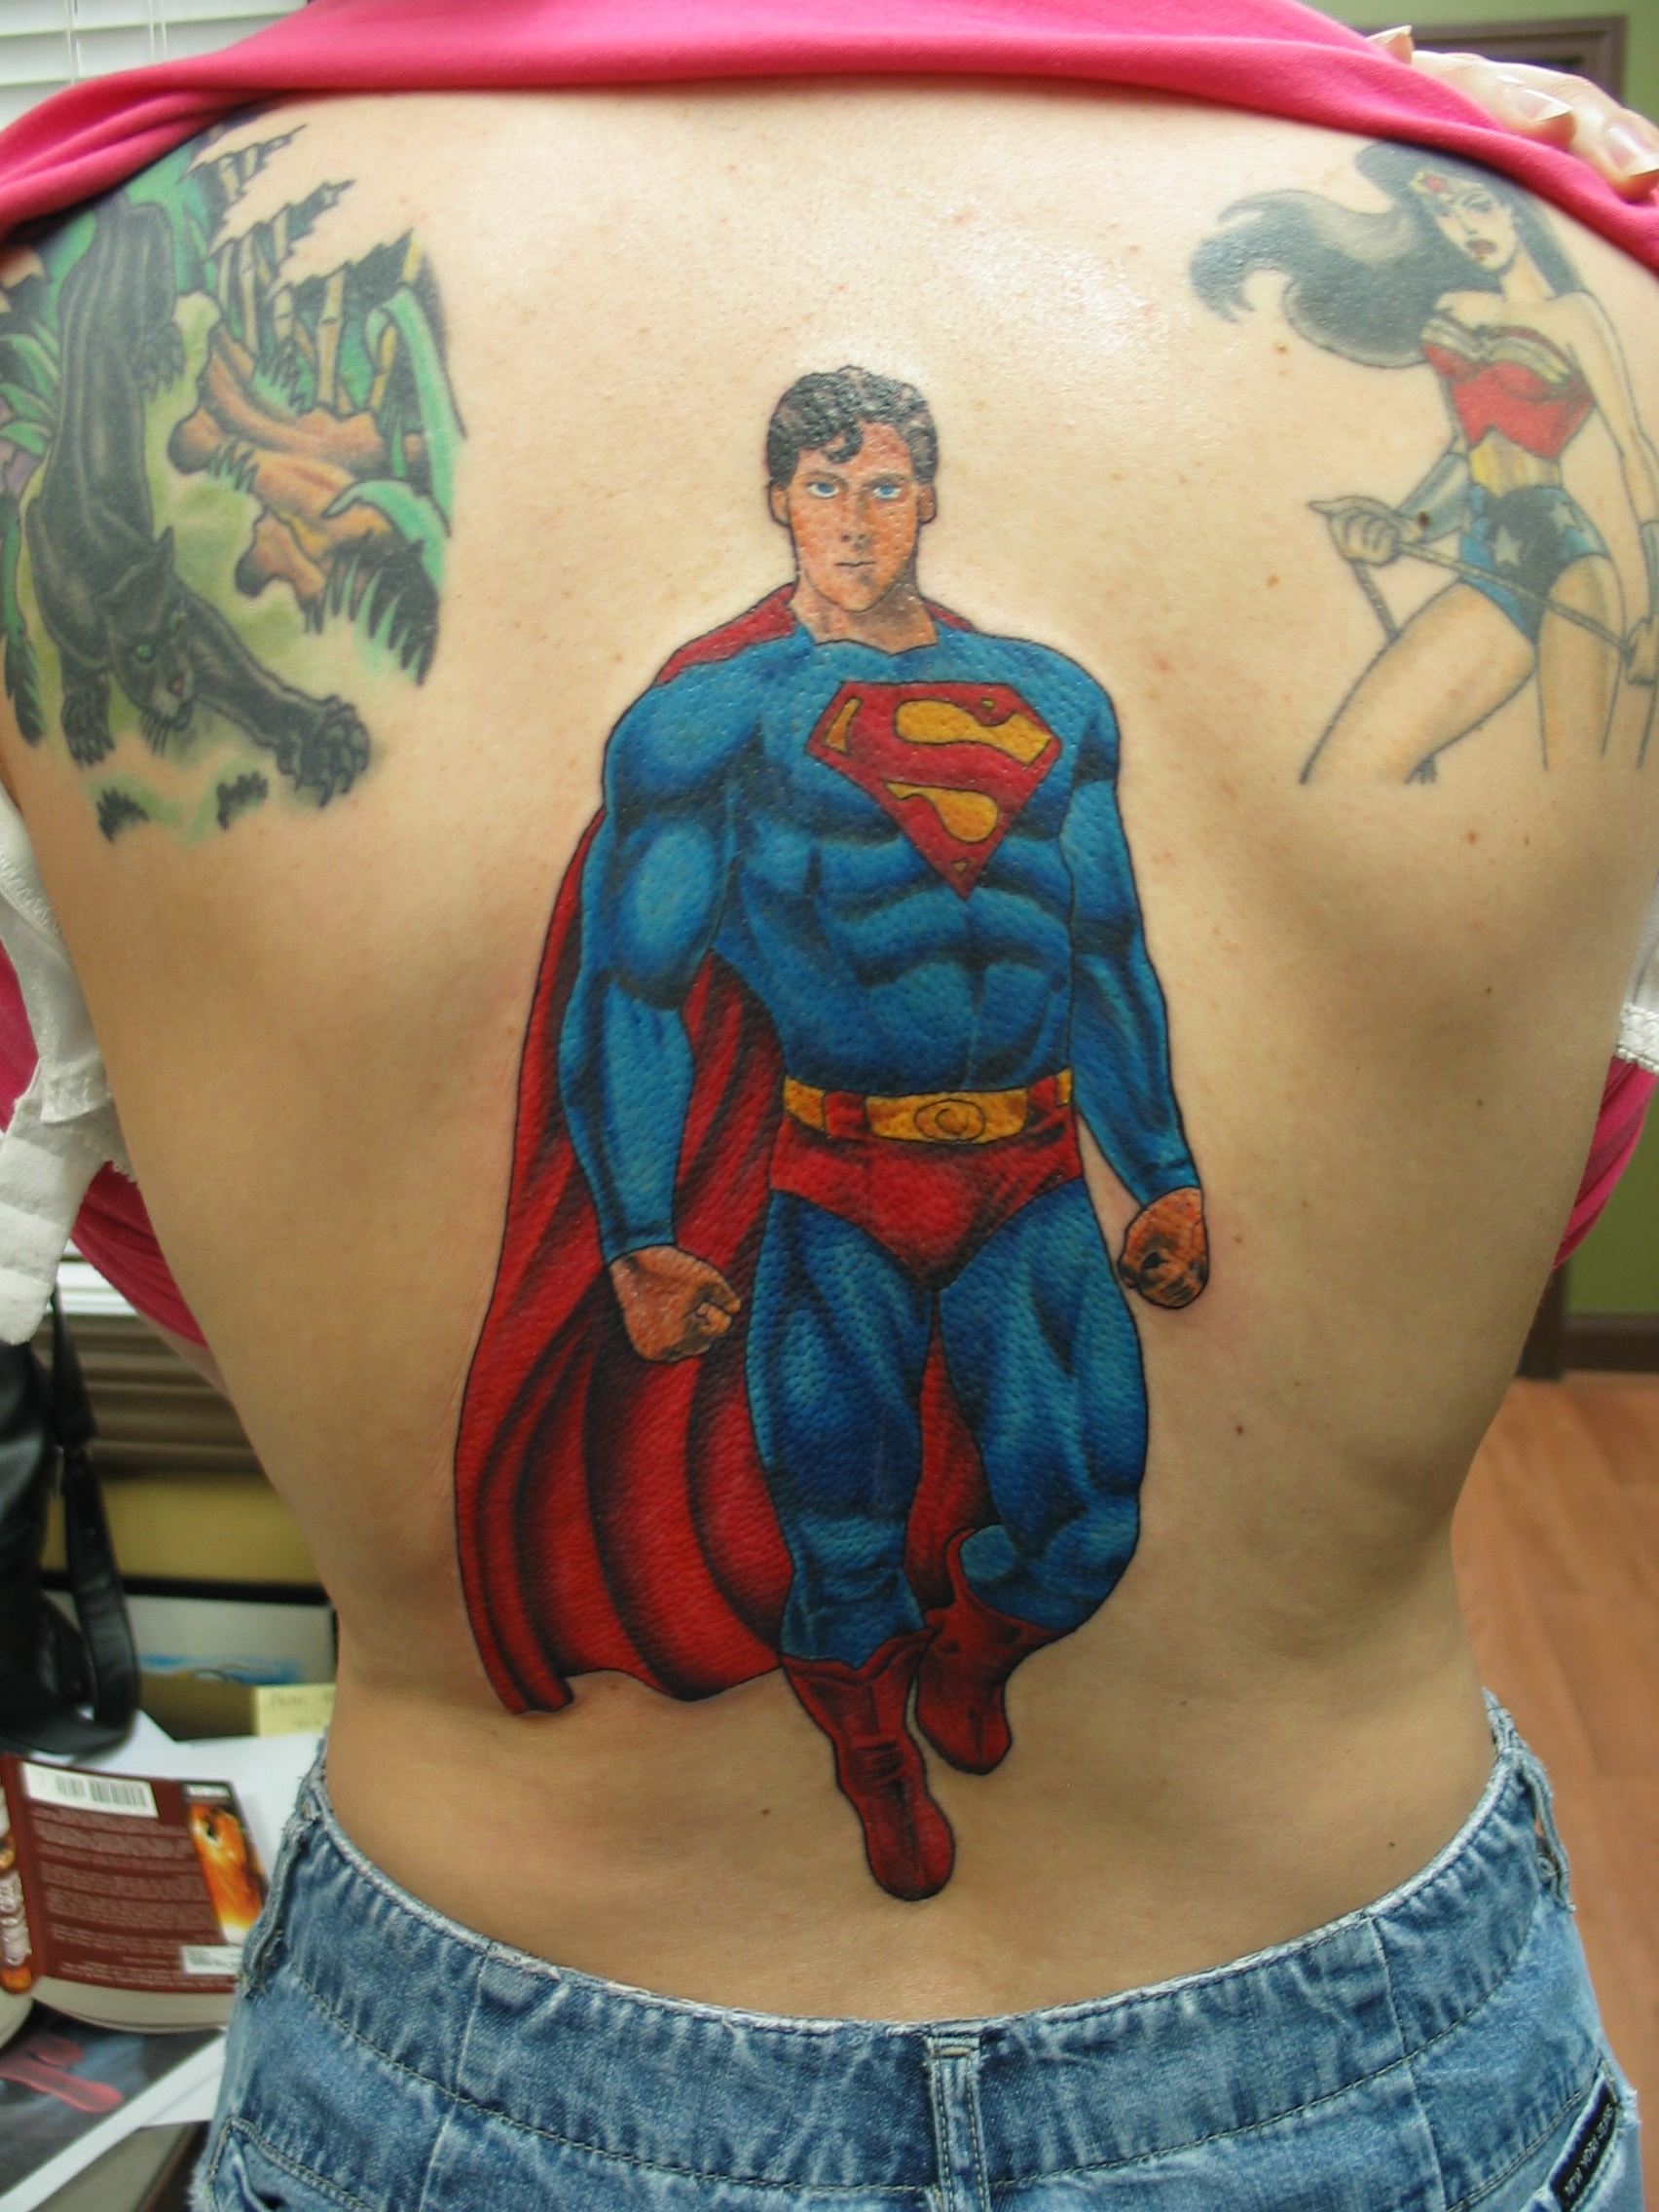 Superman Tattoos Designs, Ideas and Meaning - Tattoos For You.